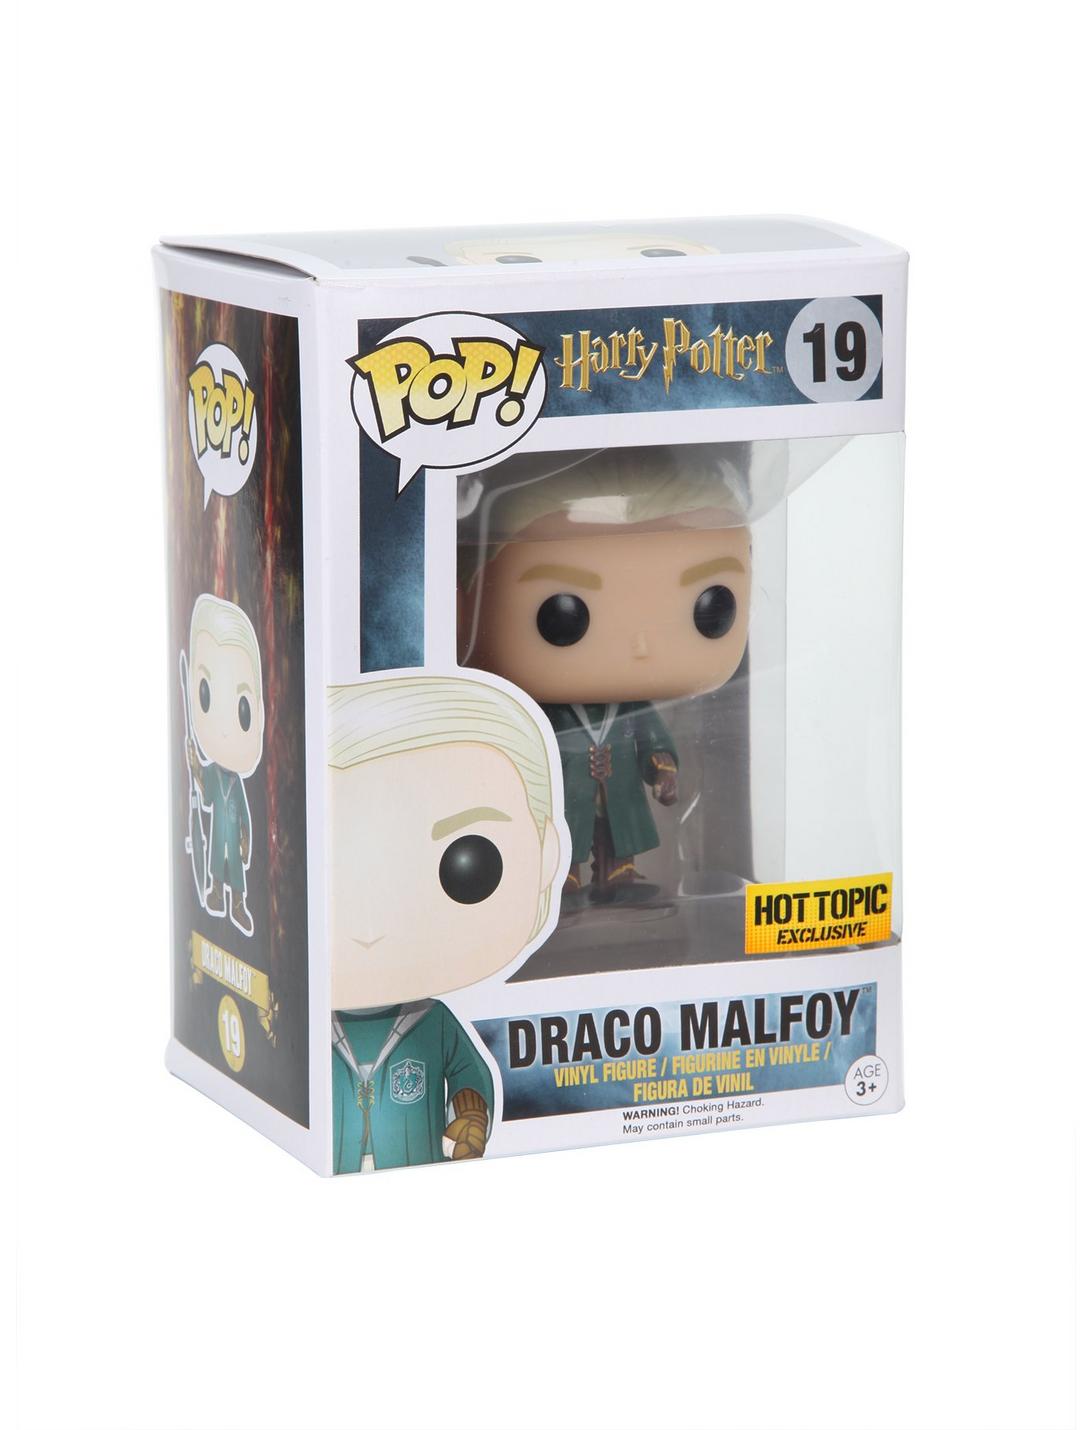 Details about   Funko Pop Harry Potter Draco Malfoy in Quidditch Robes #19 Hot Topic Exclusive!